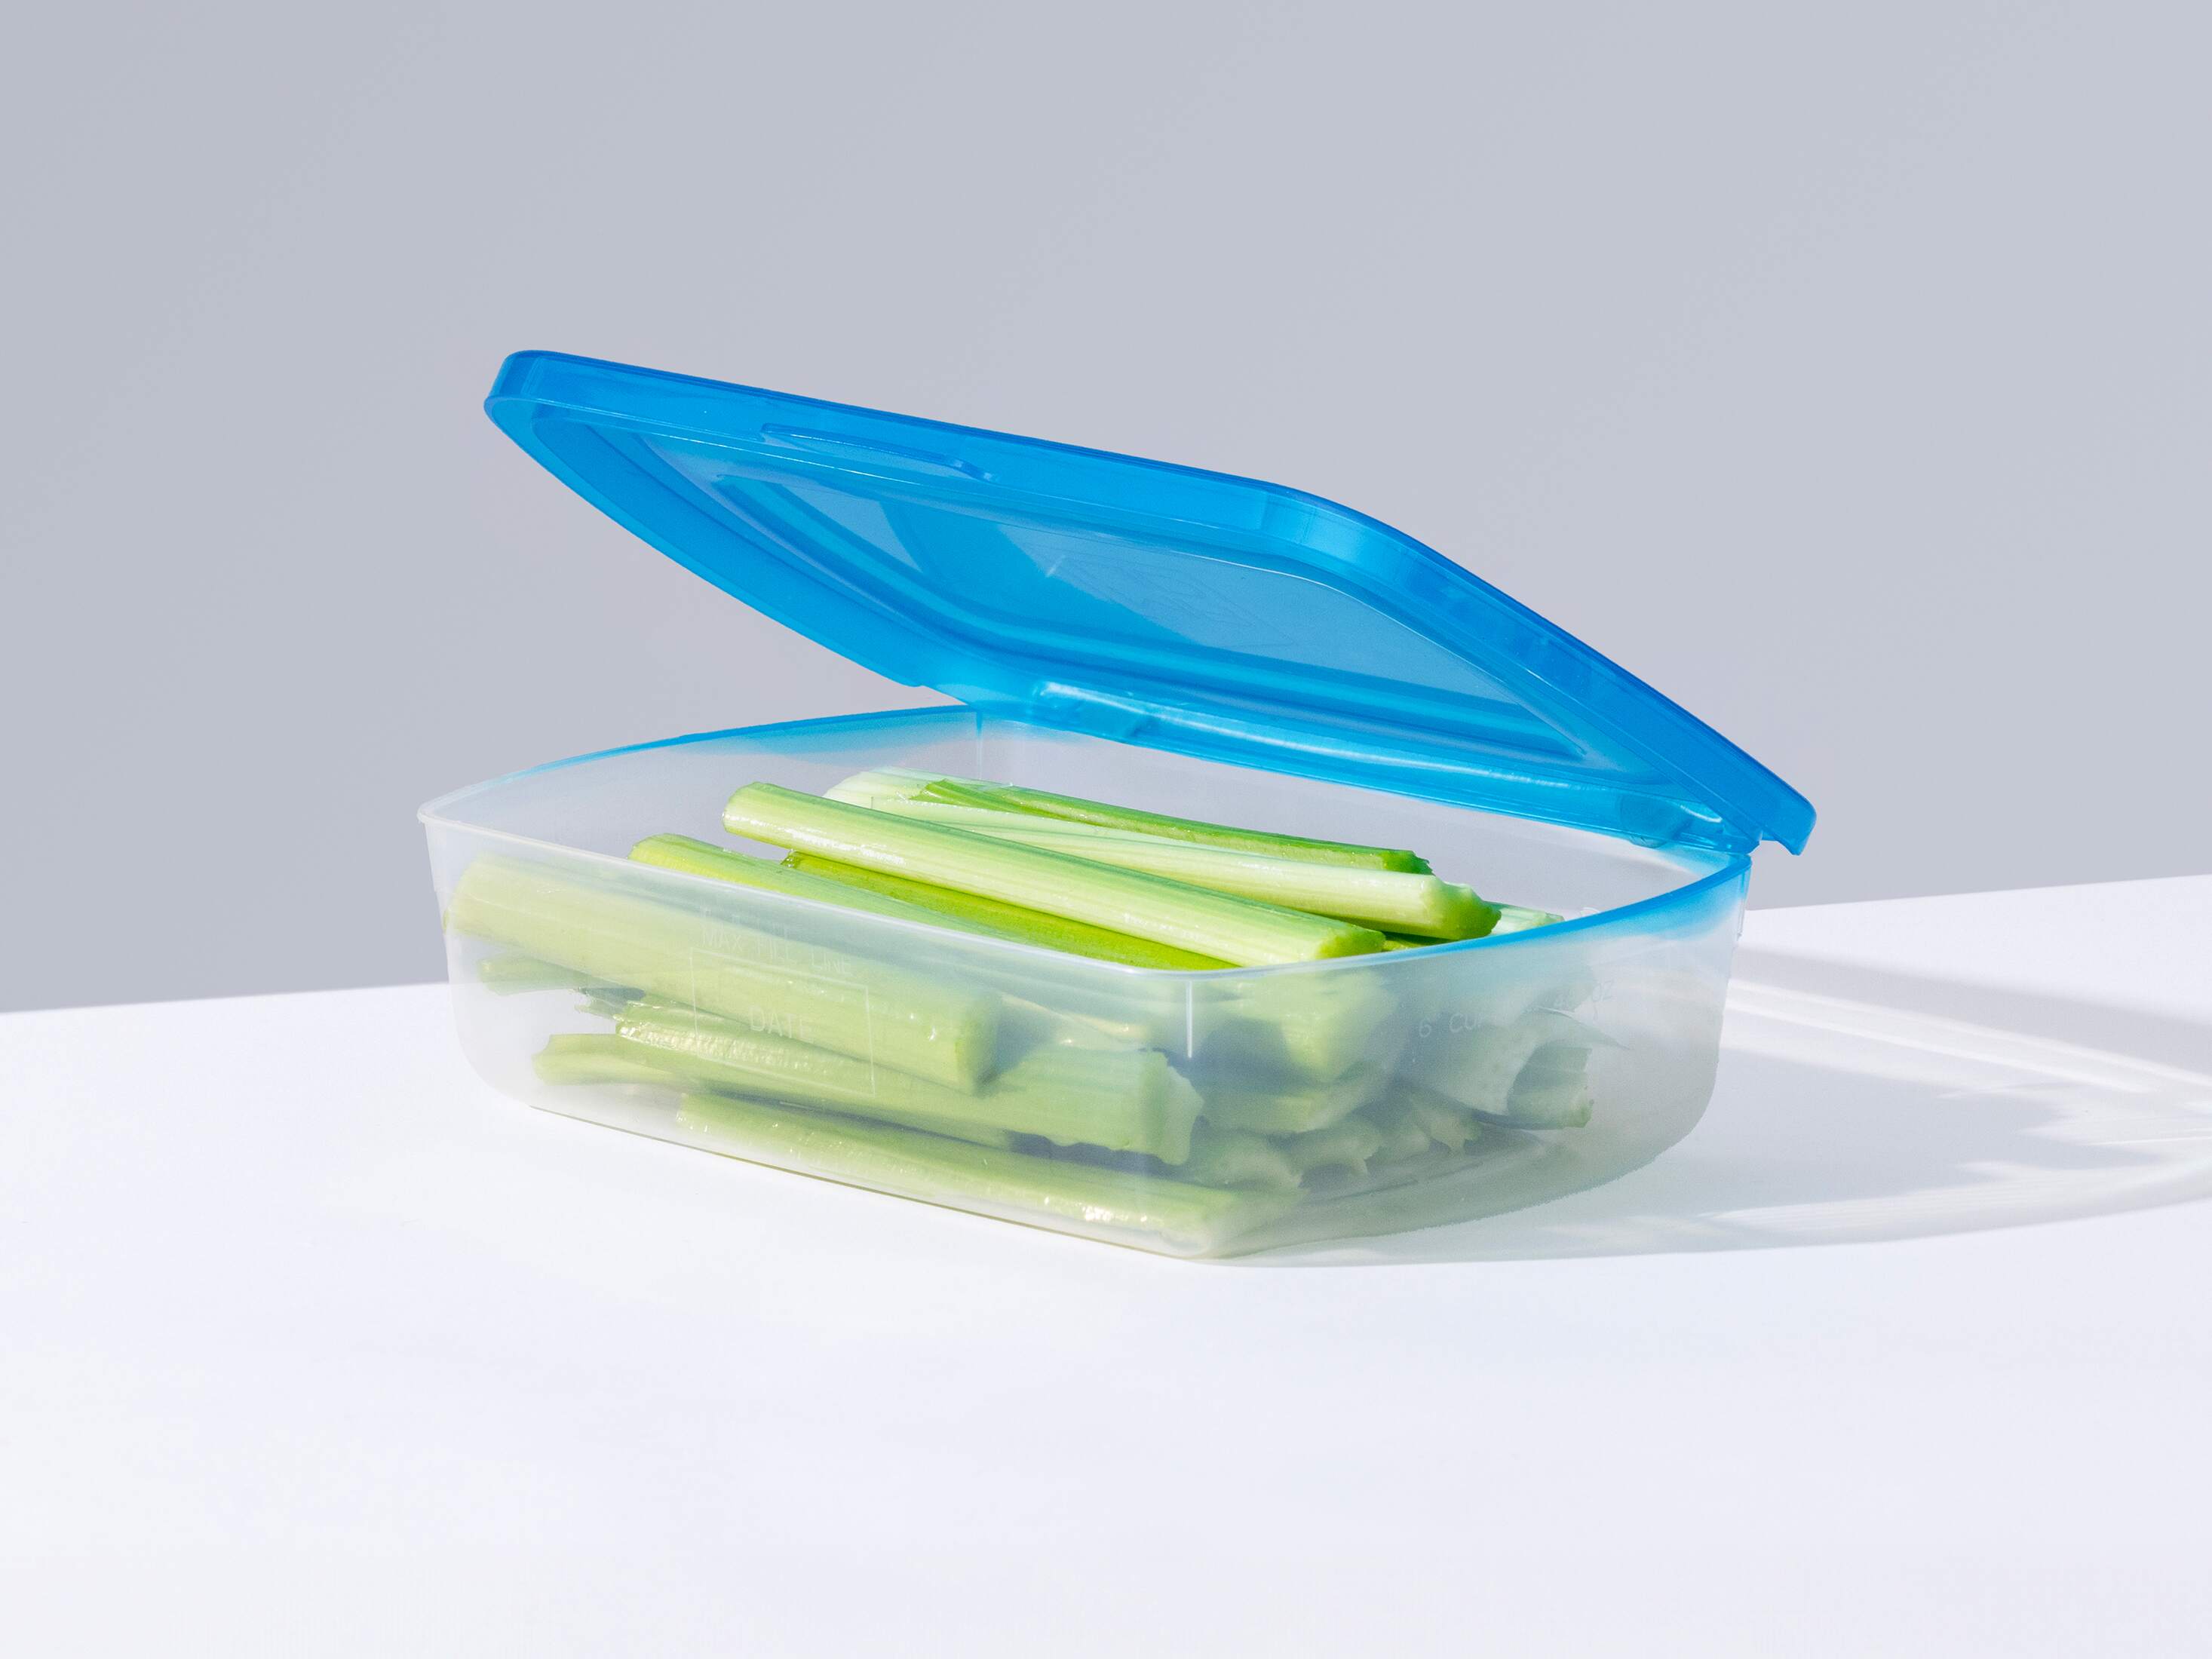 Mr. Lid Storage Containers